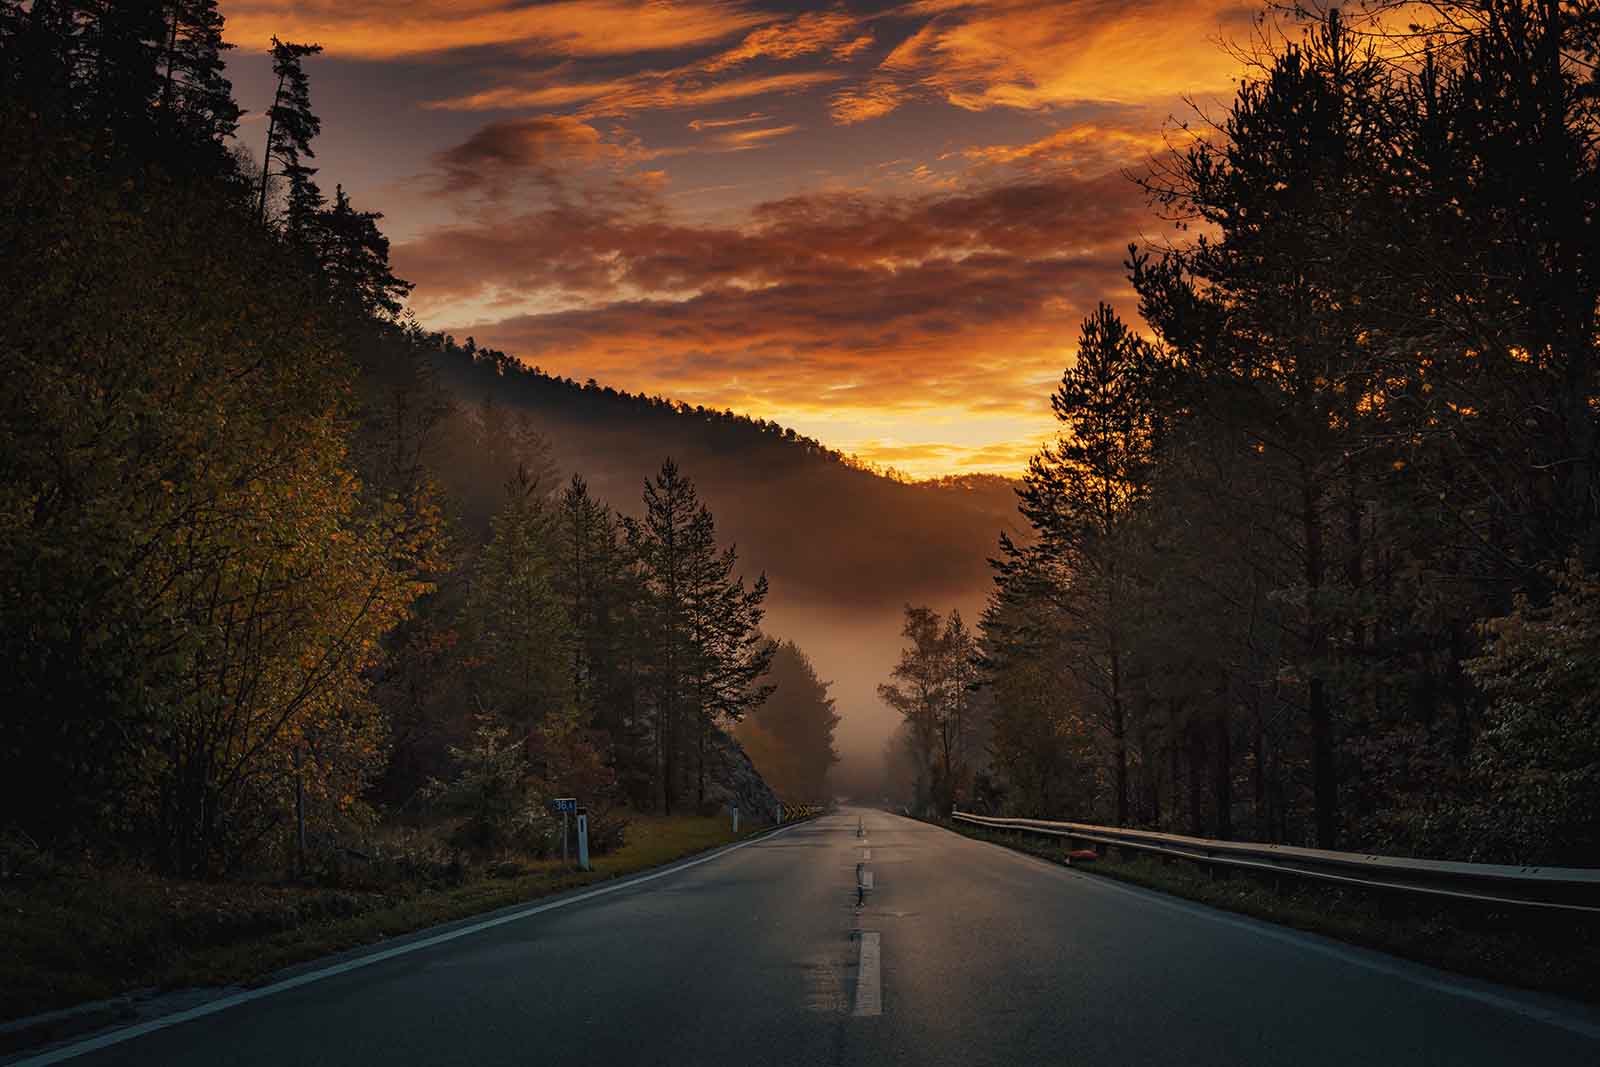 Picture of an open road with a sunset sky